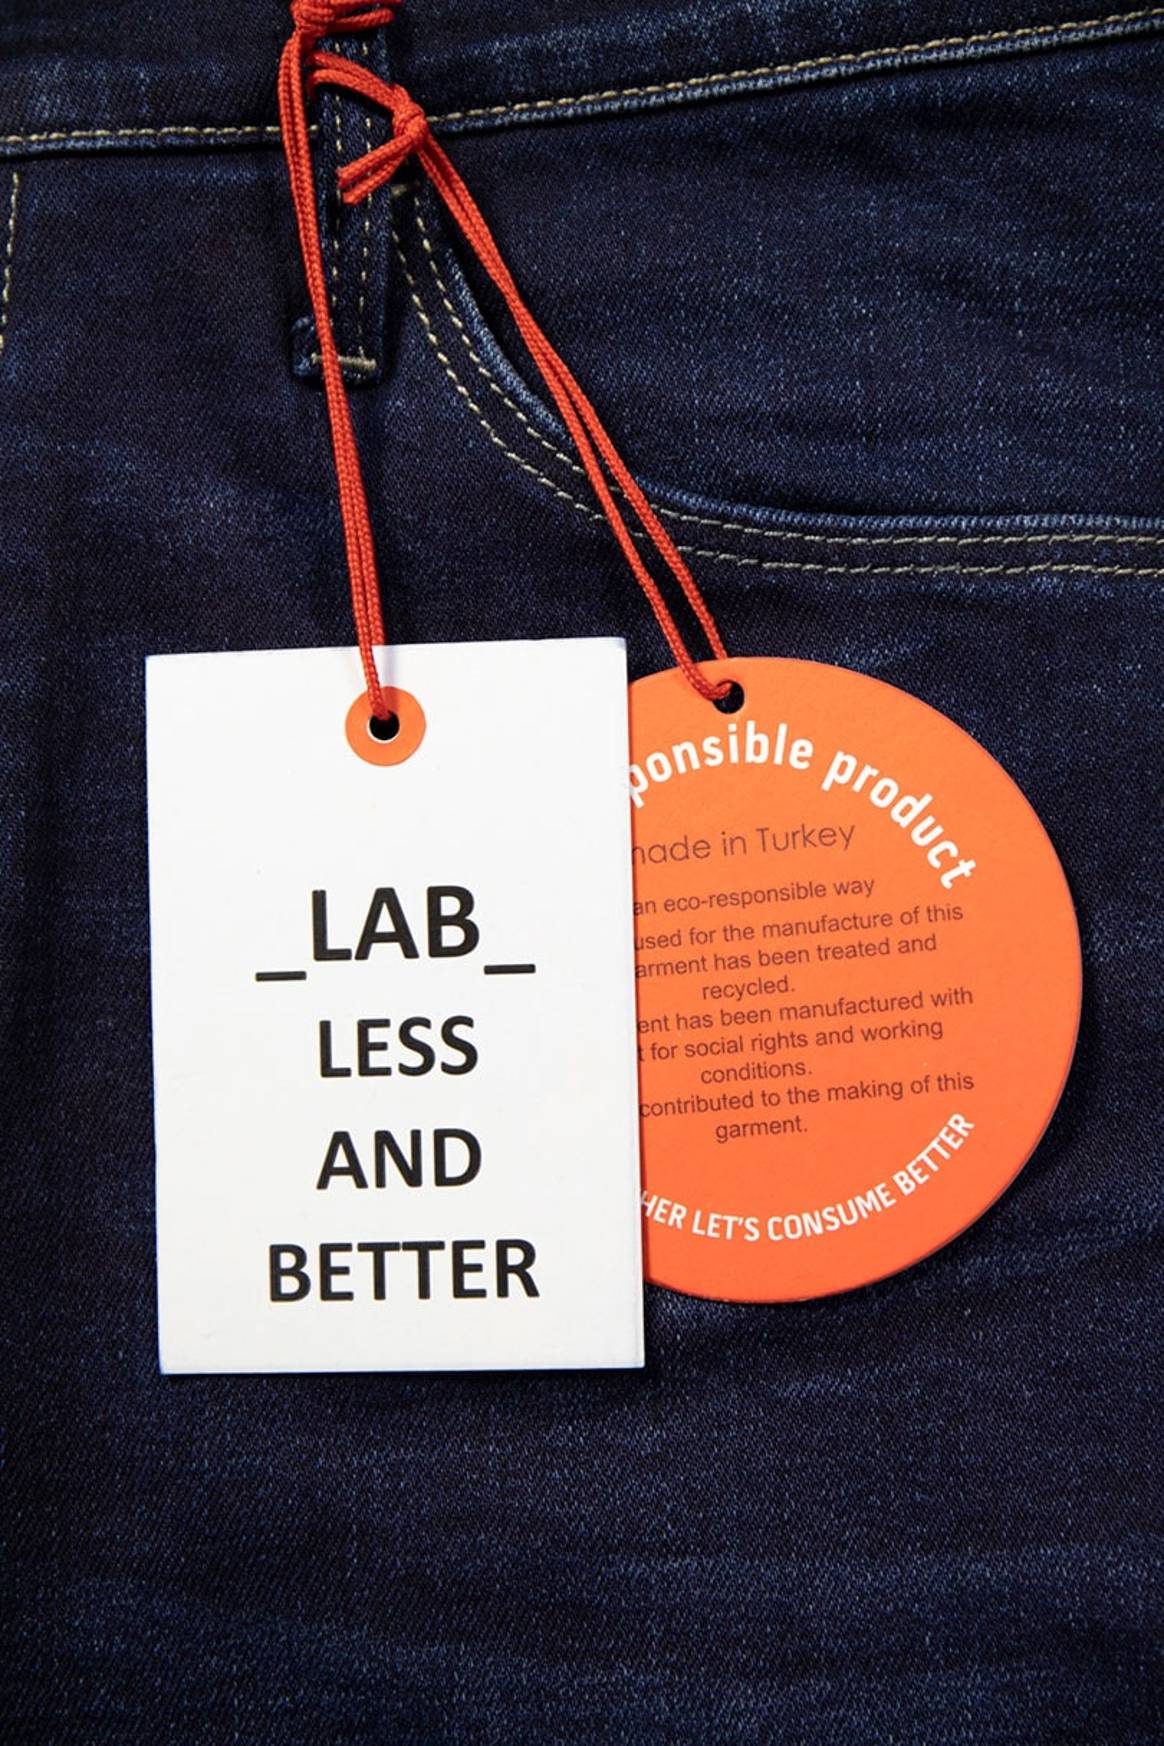 _LESS AND BETTER_: _LAB_